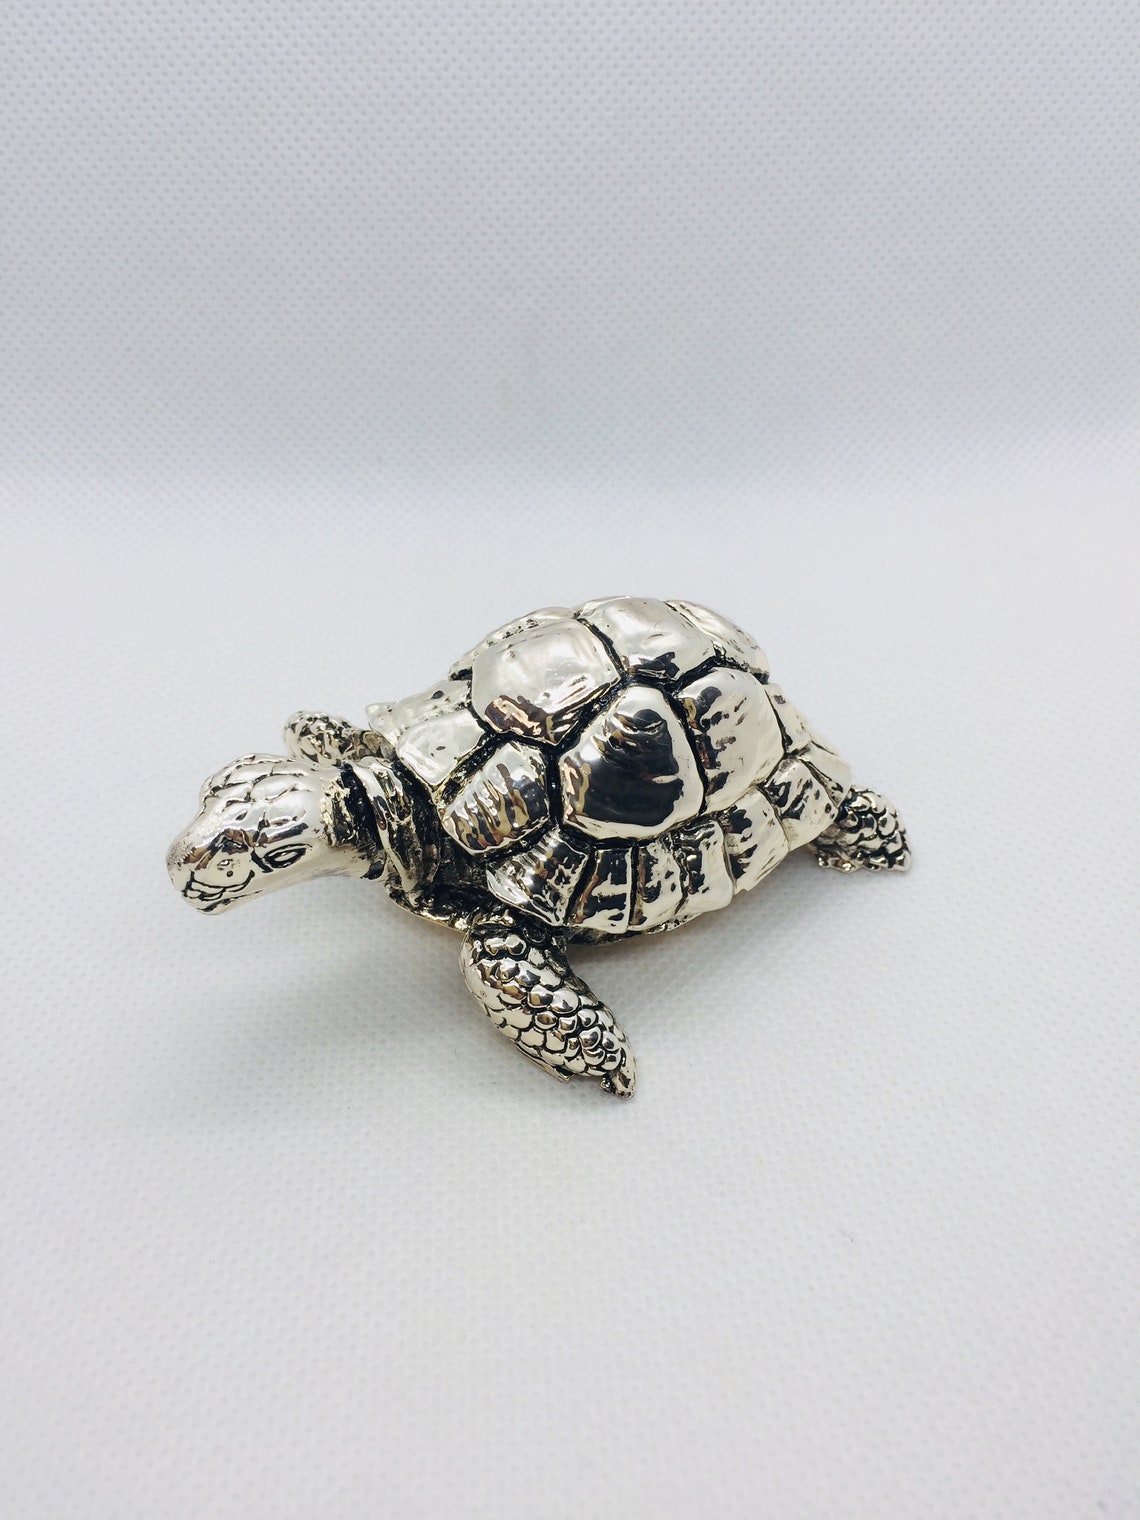 925 Sterling Silver Turtle Figurine Solid Silver Animal | Etsy